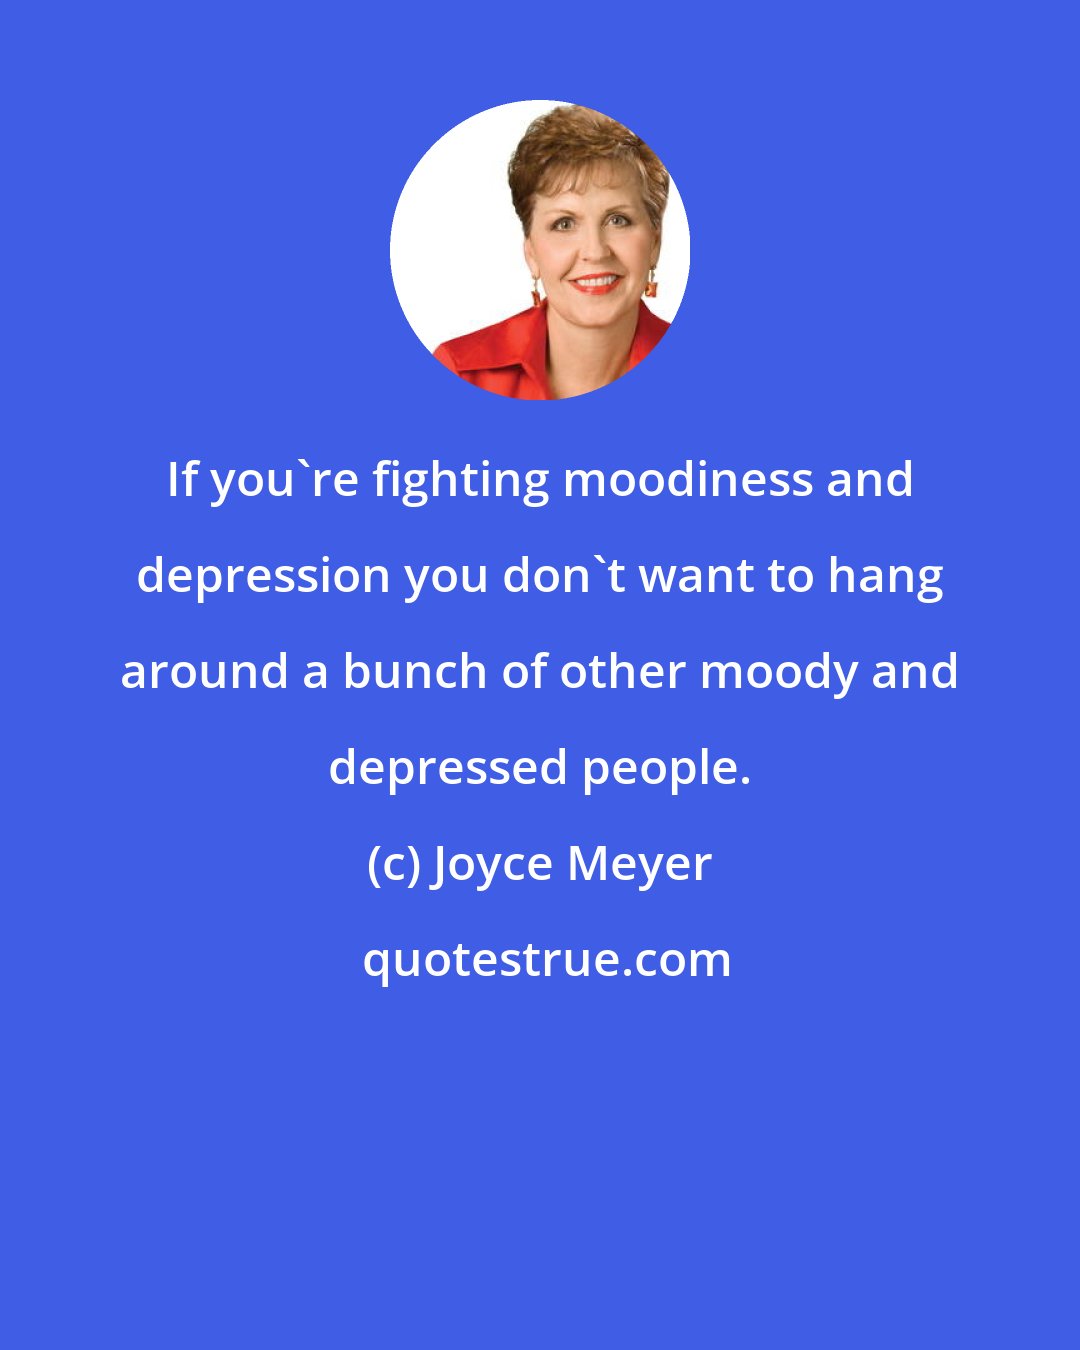 Joyce Meyer: If you're fighting moodiness and depression you don't want to hang around a bunch of other moody and depressed people.